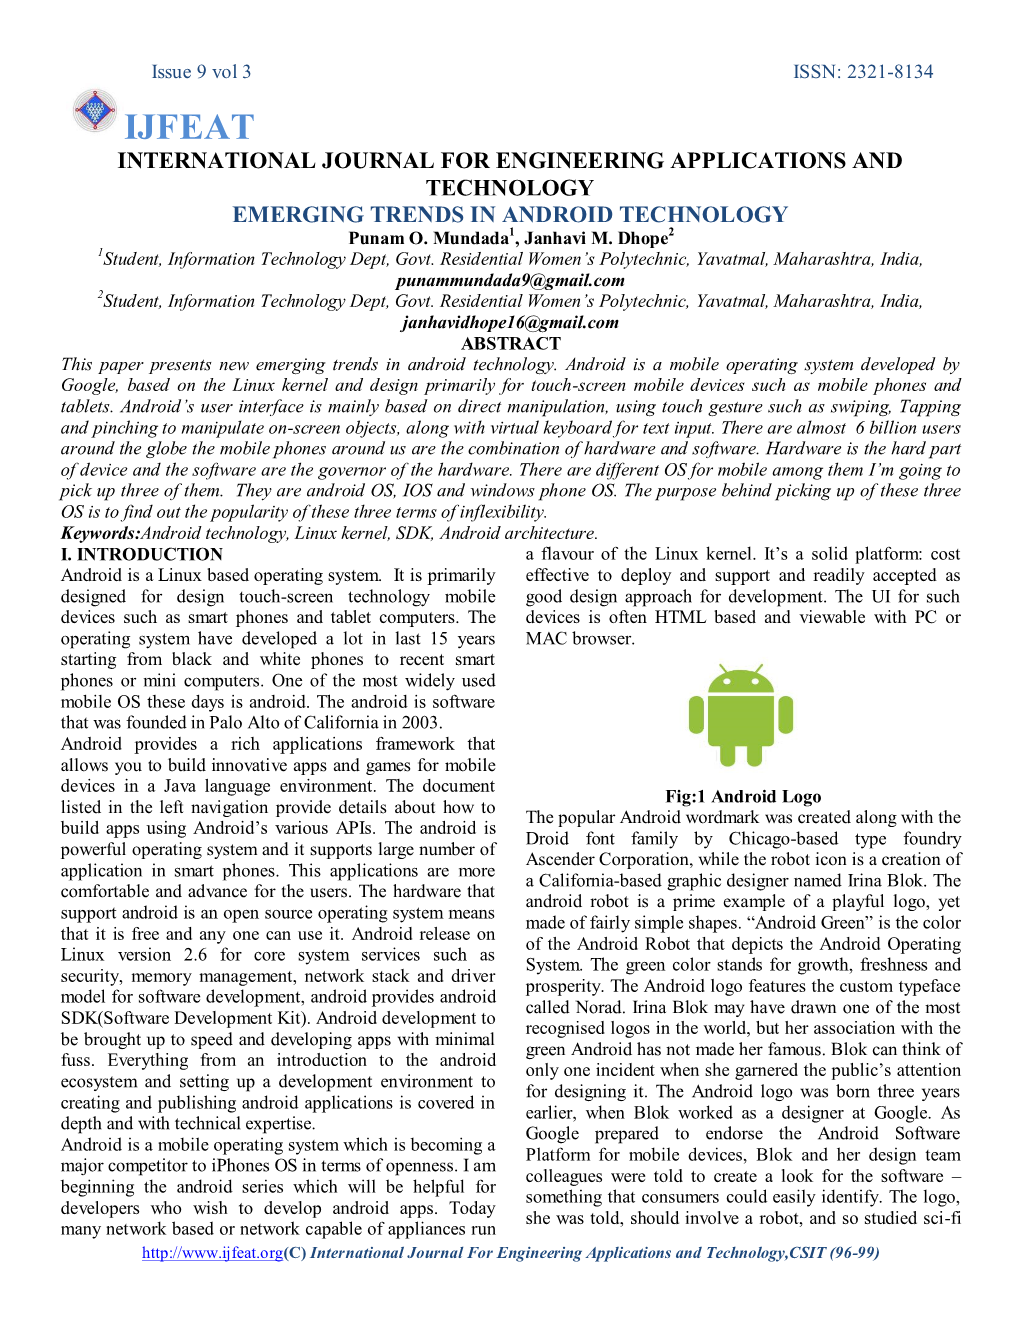 IJFEAT INTERNATIONAL JOURNAL for ENGINEERING APPLICATIONS and TECHNOLOGY EMERGING TRENDS in ANDROID TECHNOLOGY Punam O